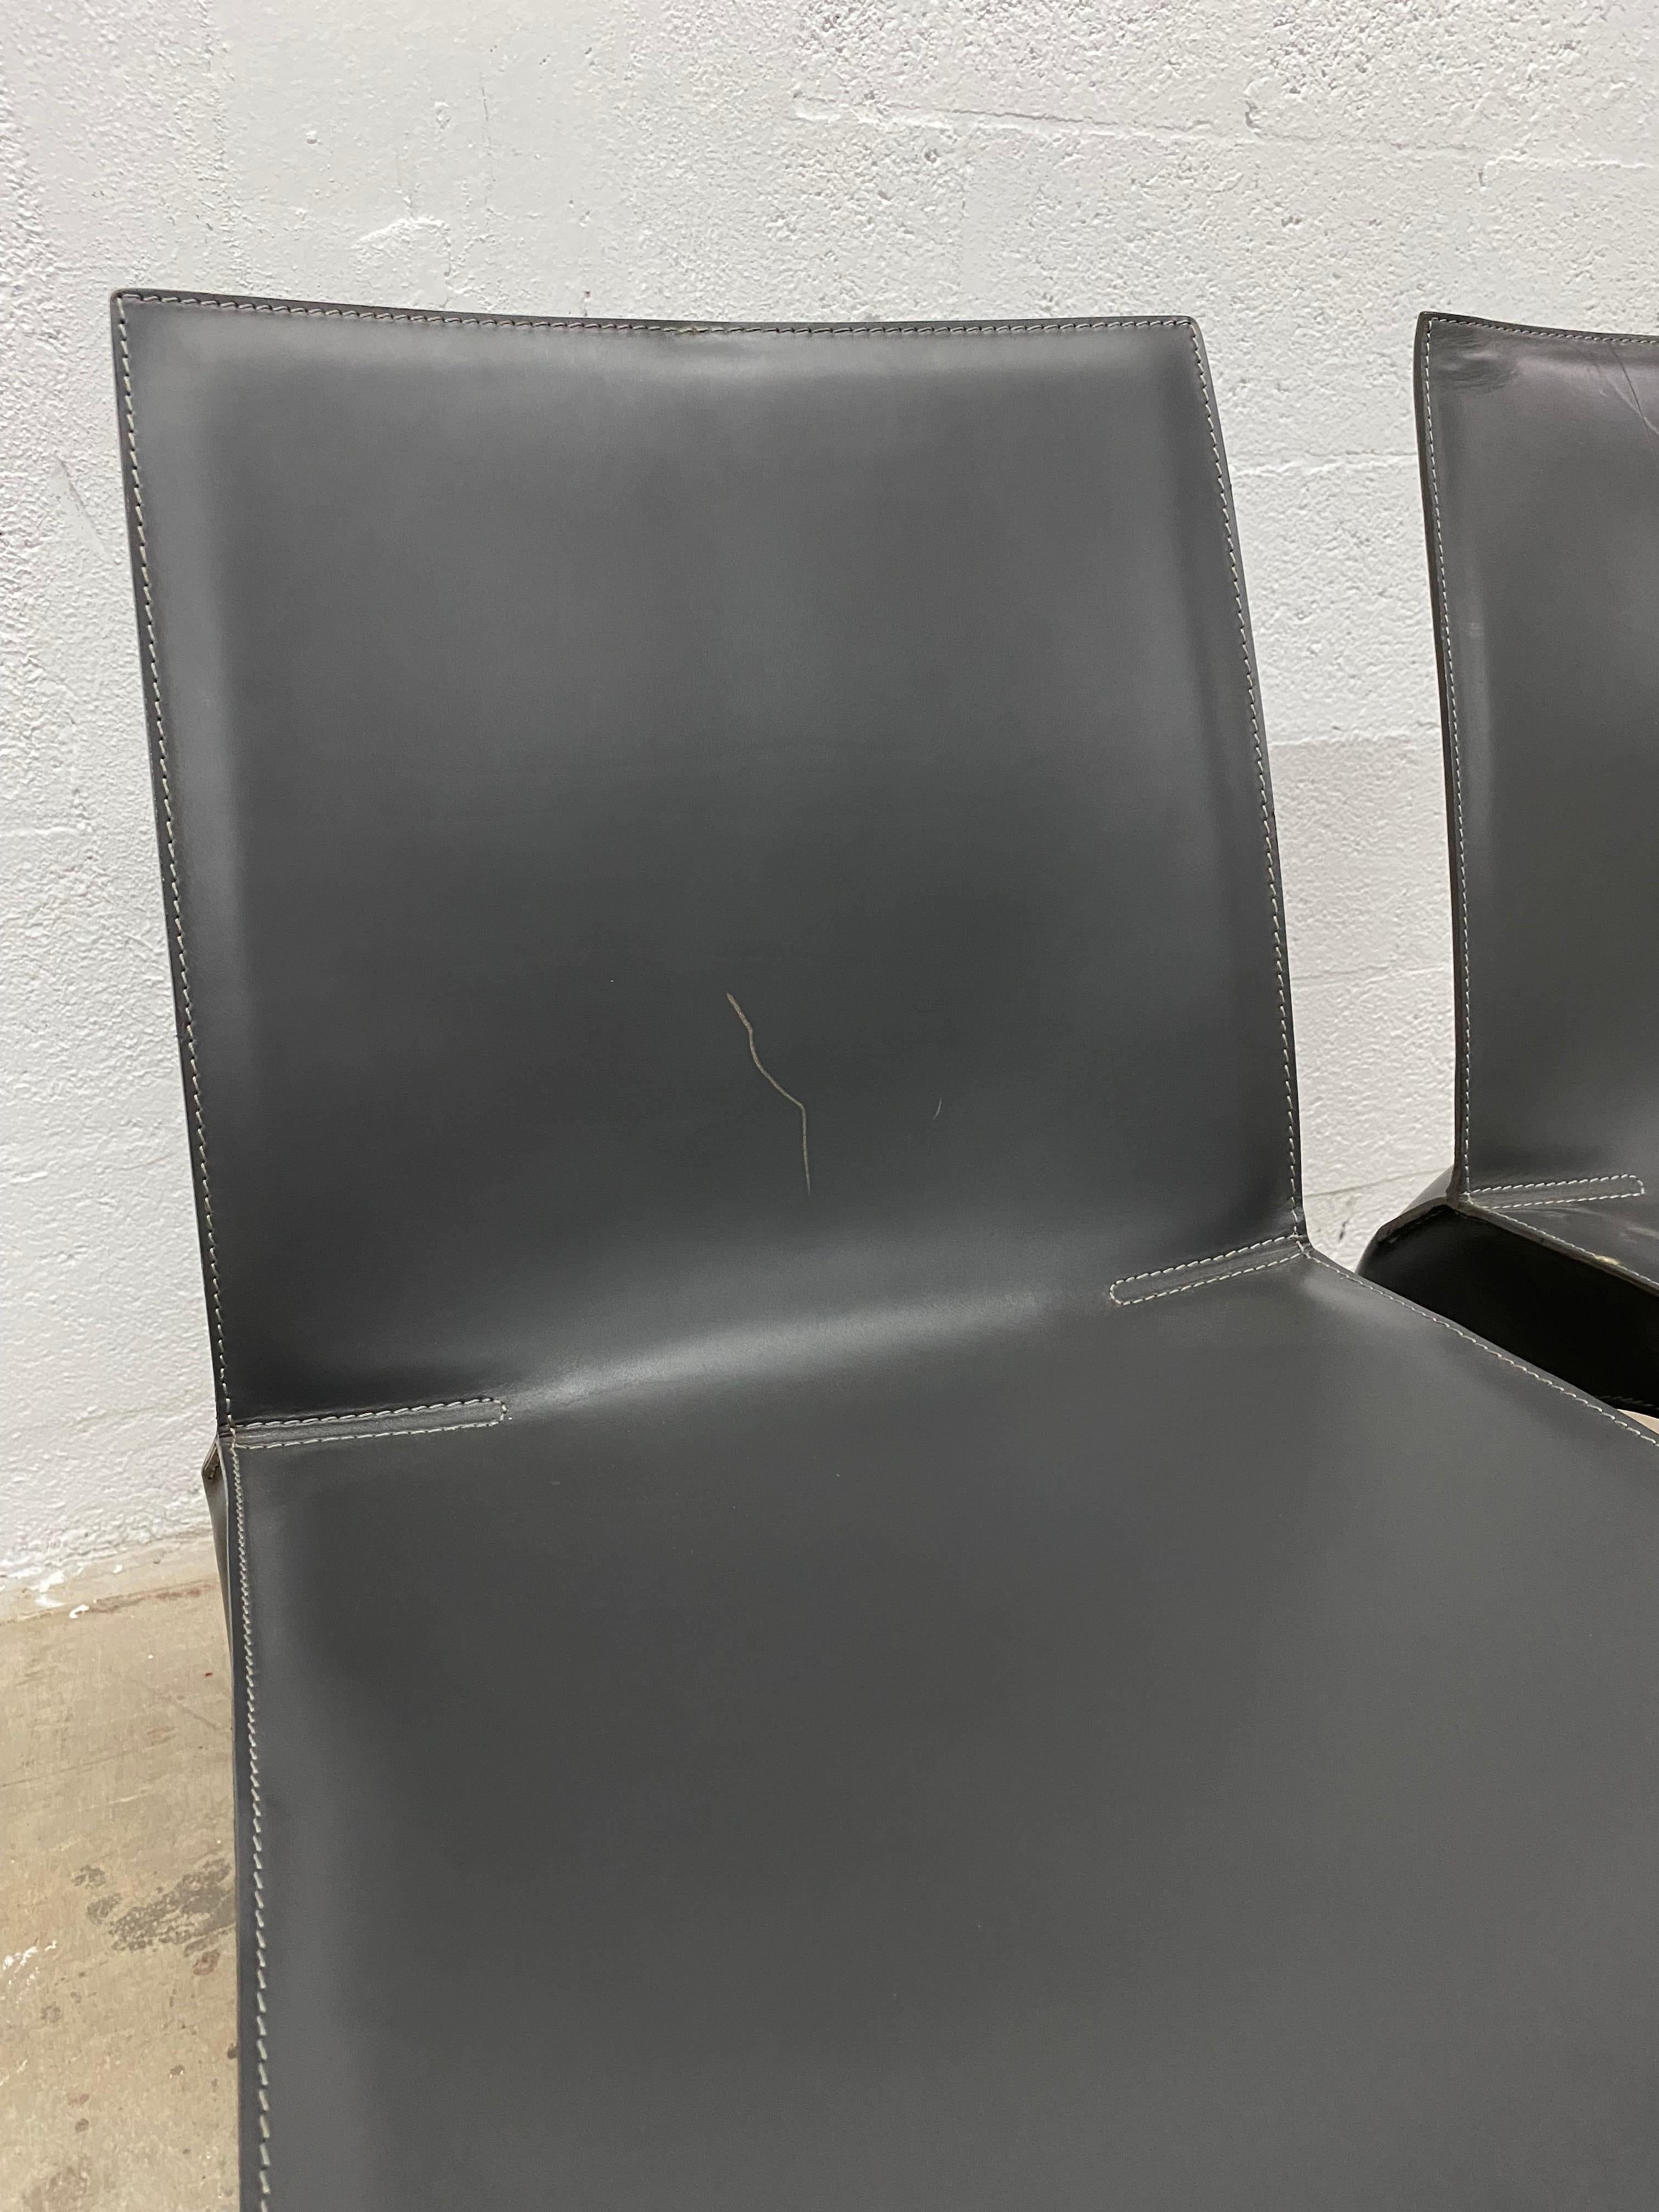 Riccardo Blumer & Matteo Borghi BB Leather Dining Chairs for Poliform, a Pair For Sale 2